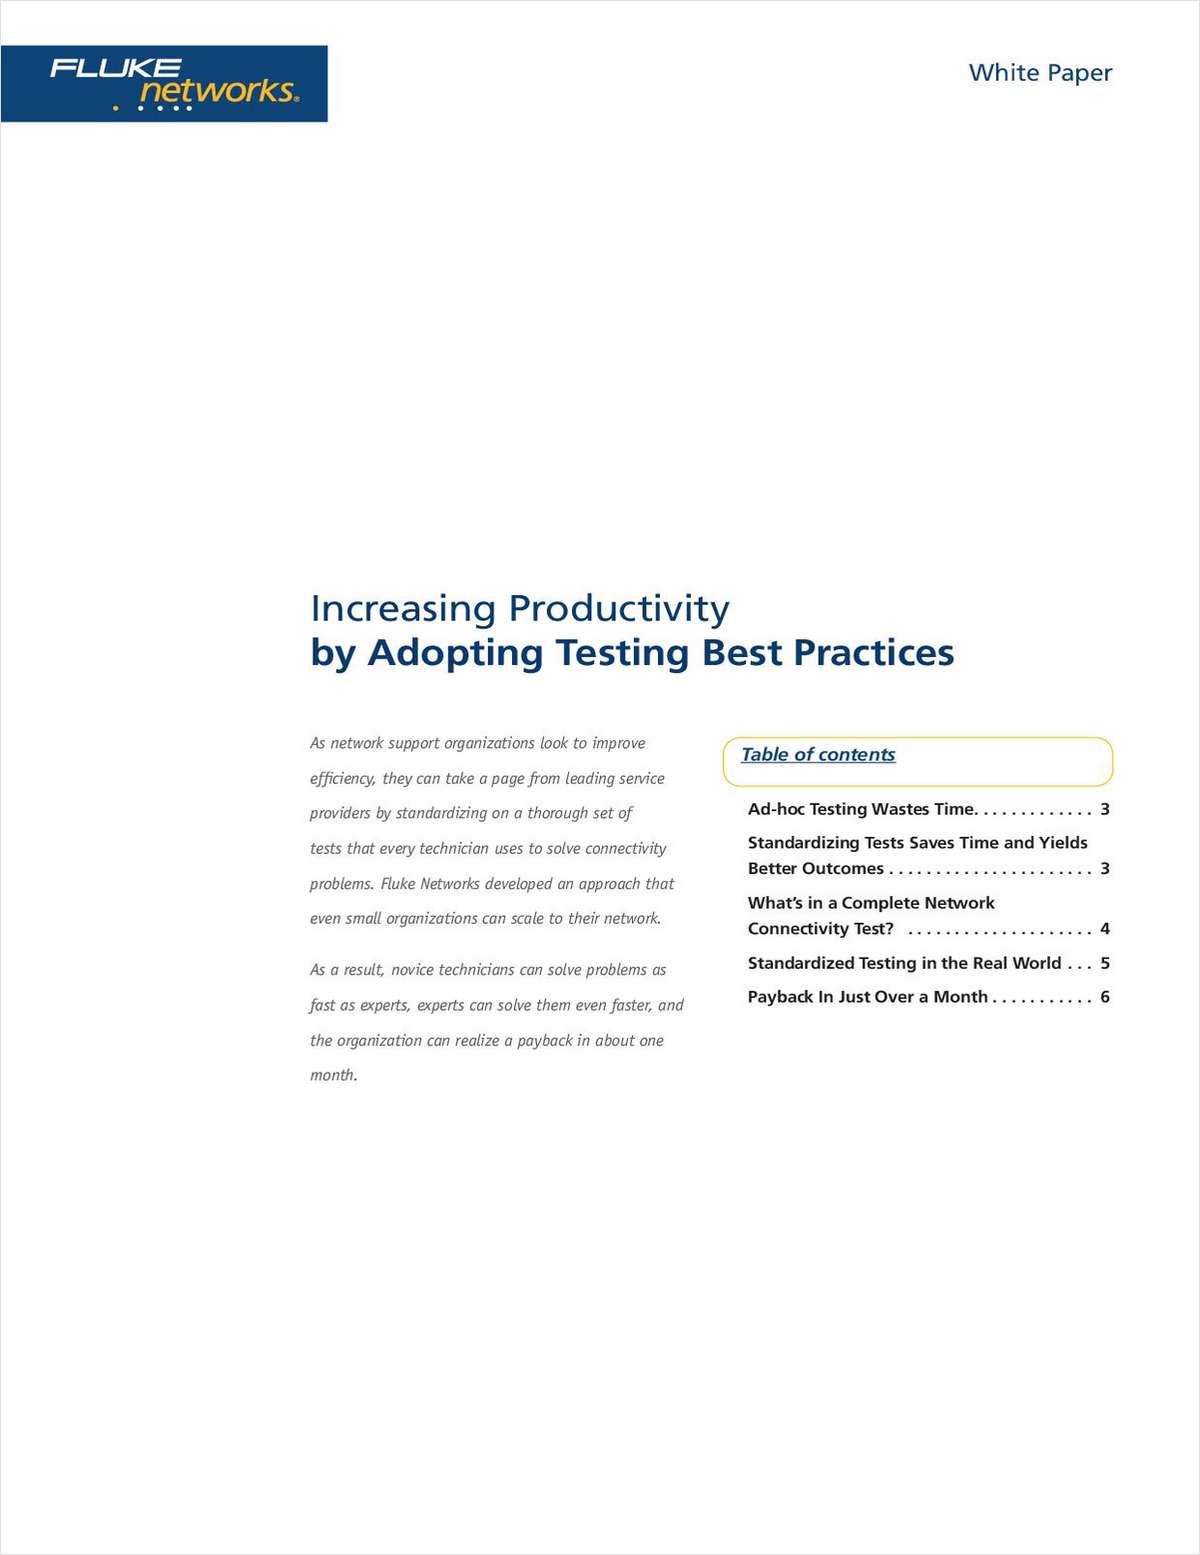 Increasing Productivity by Adopting Testing Best Practices